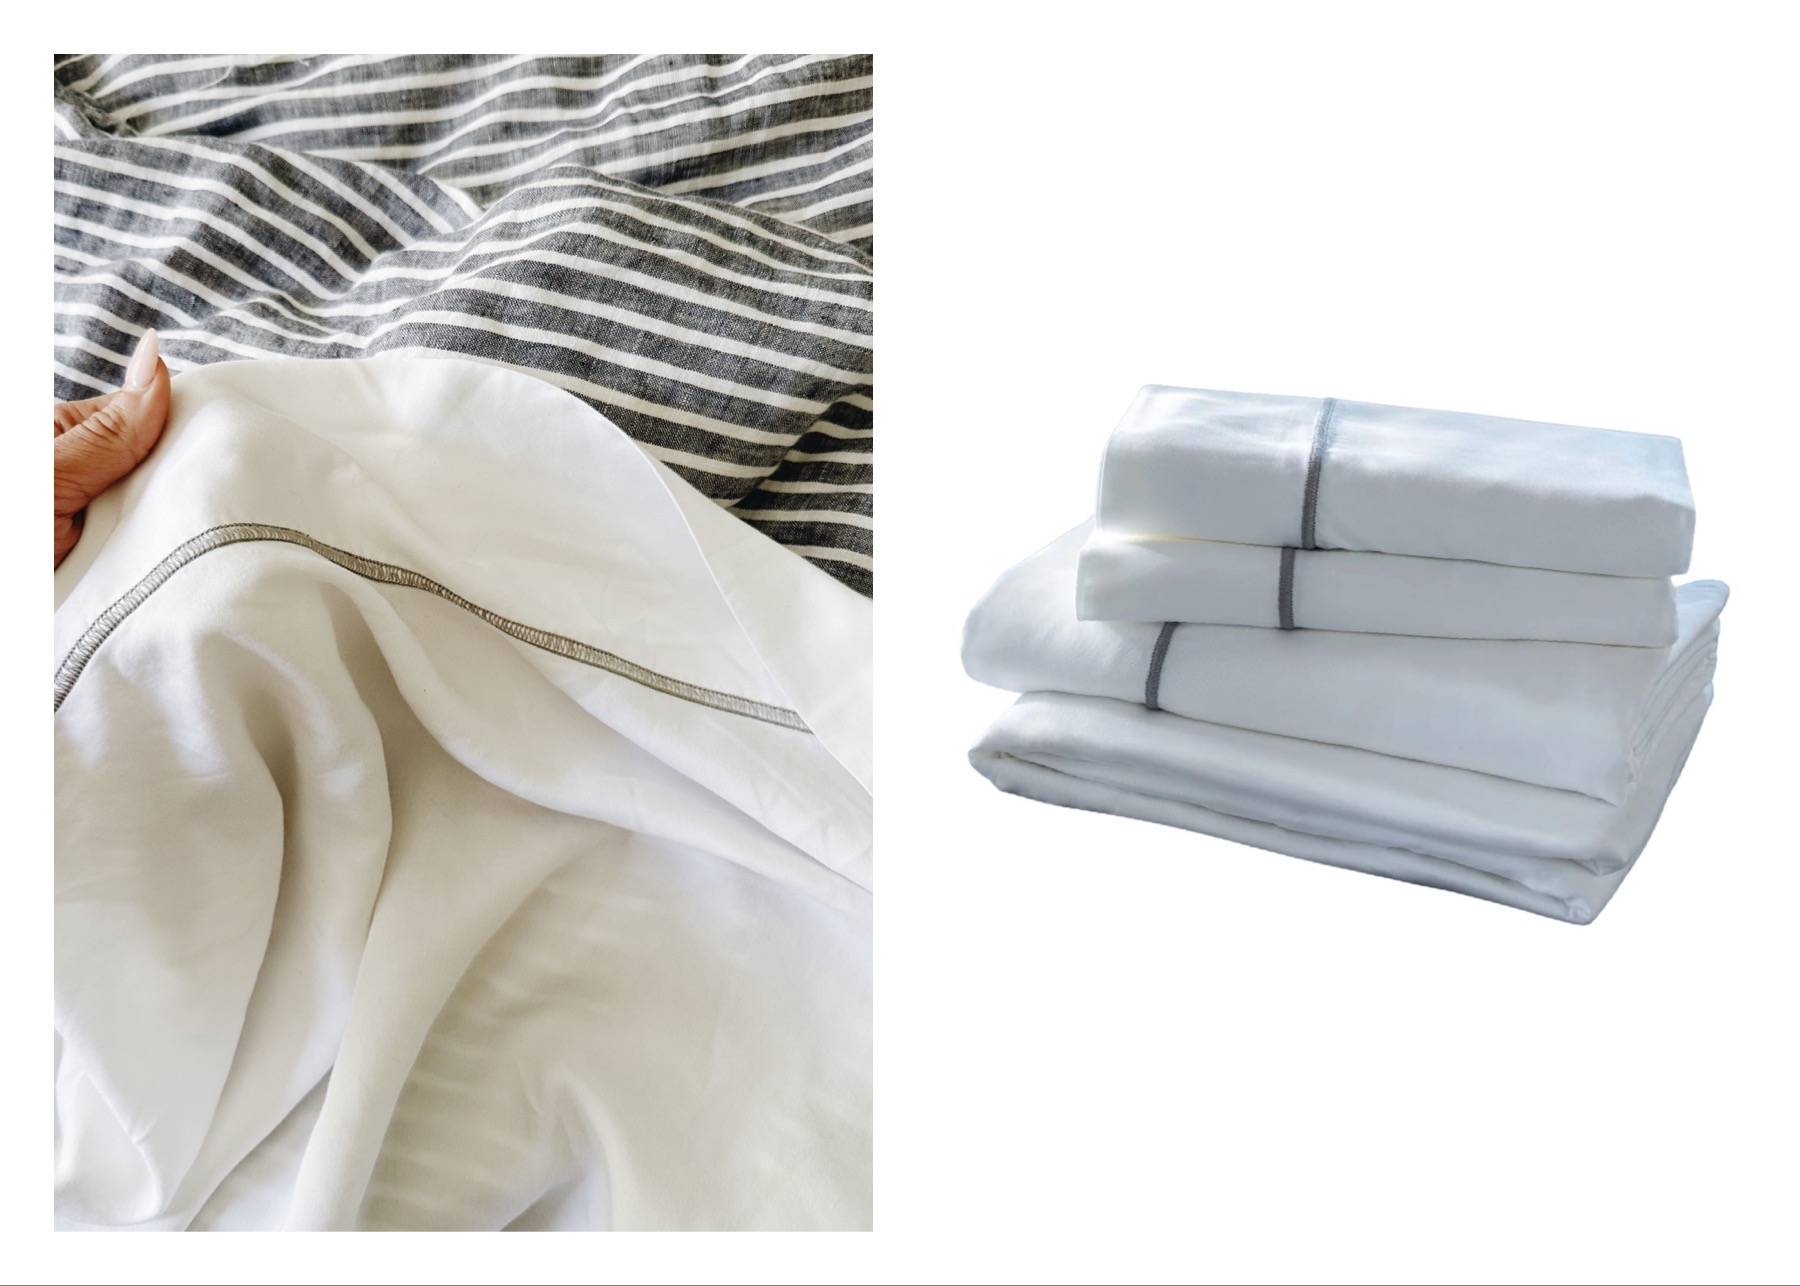 White handing touching white sheets next to a stock photo of white sheets.